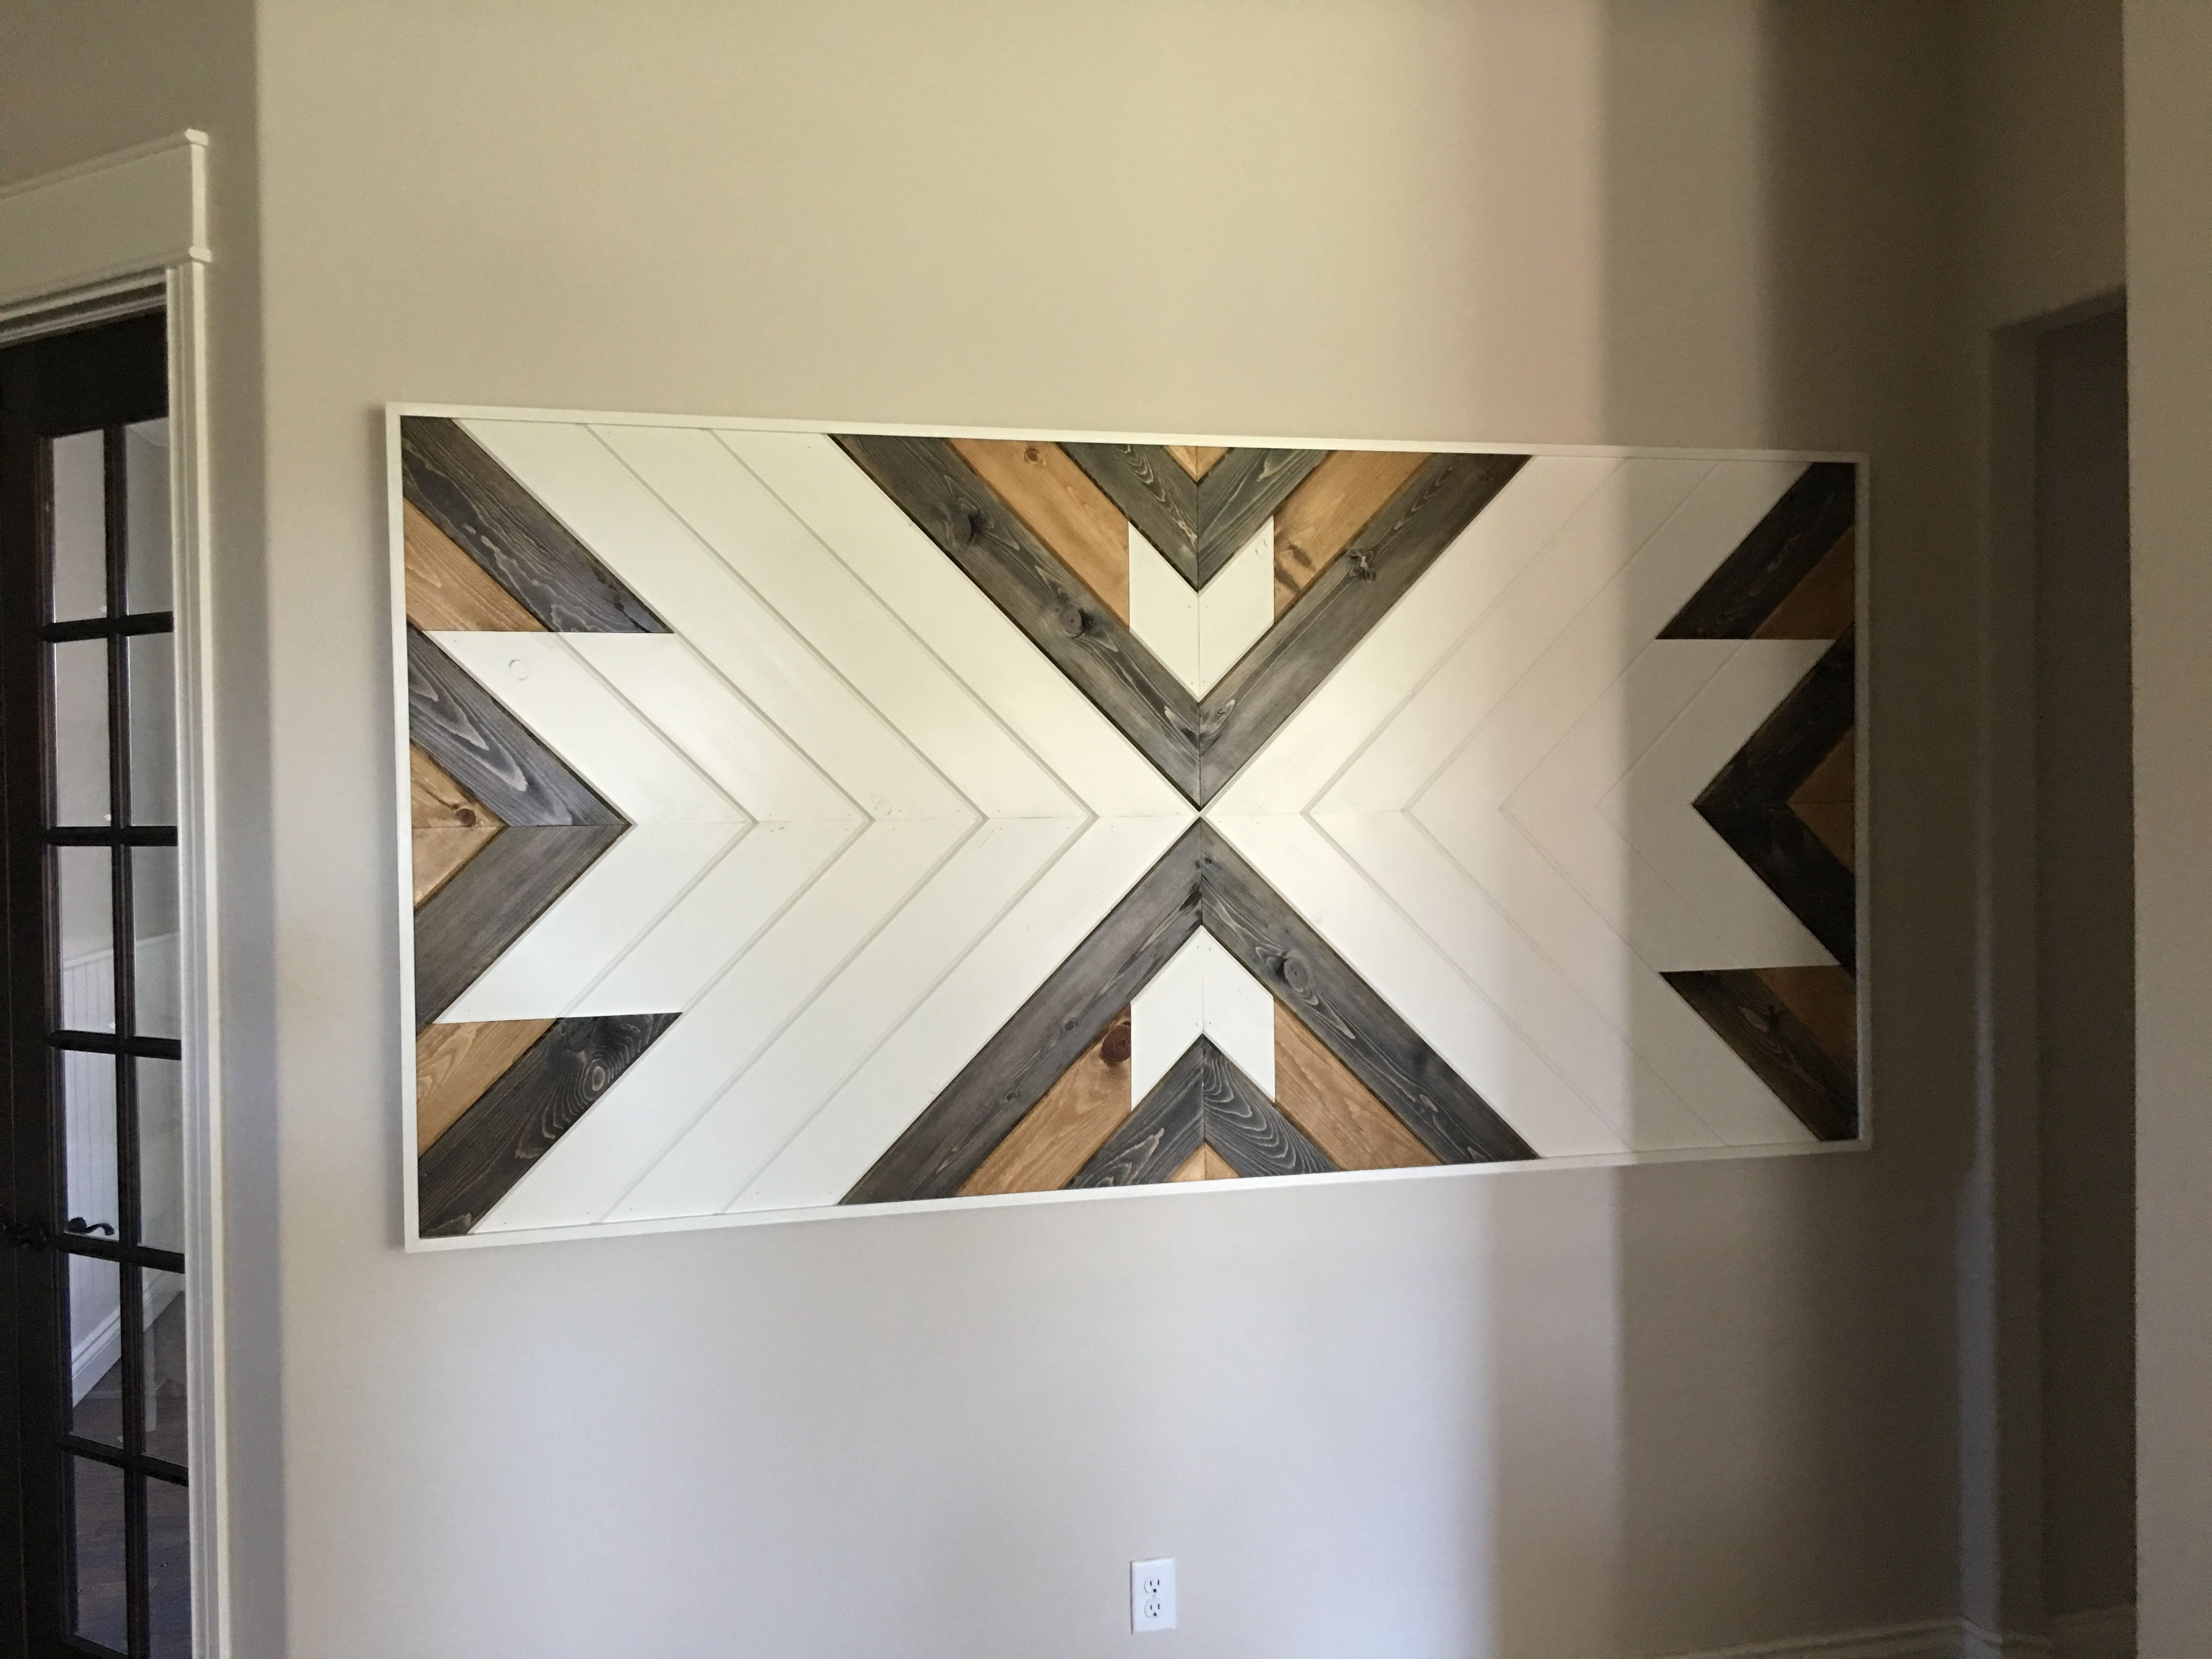 Easy To Sell Woodworking Inside 2018 Chevron Wall Art (View 7 of 20)